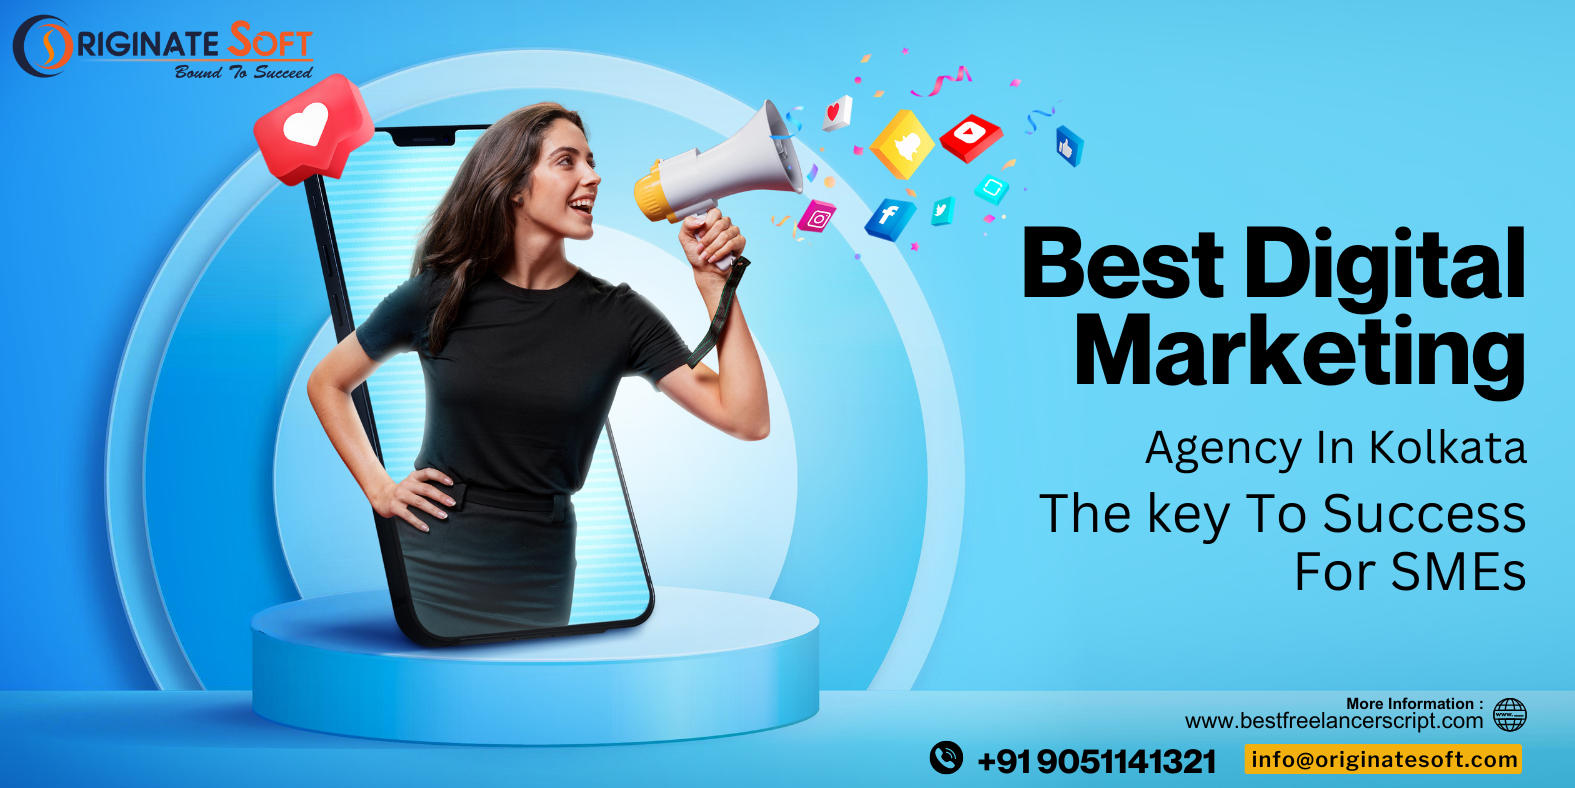 Best Digital Marketing Agency in Kolkata: The Key to Success for SMEs